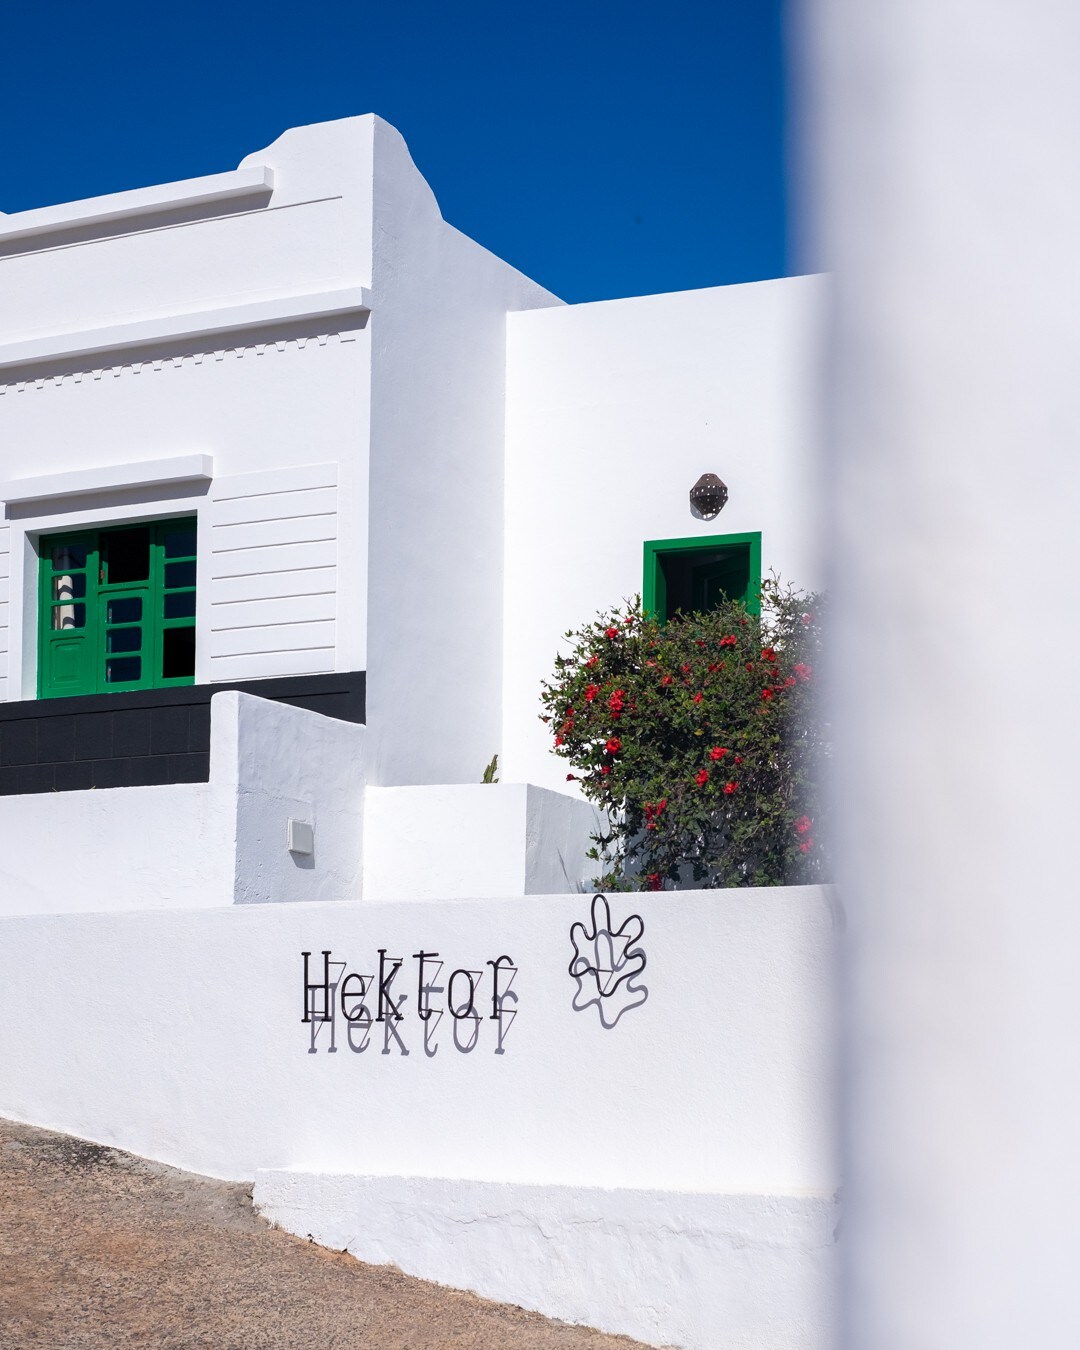 Stay at an art and permaculture farm in Lanzarote